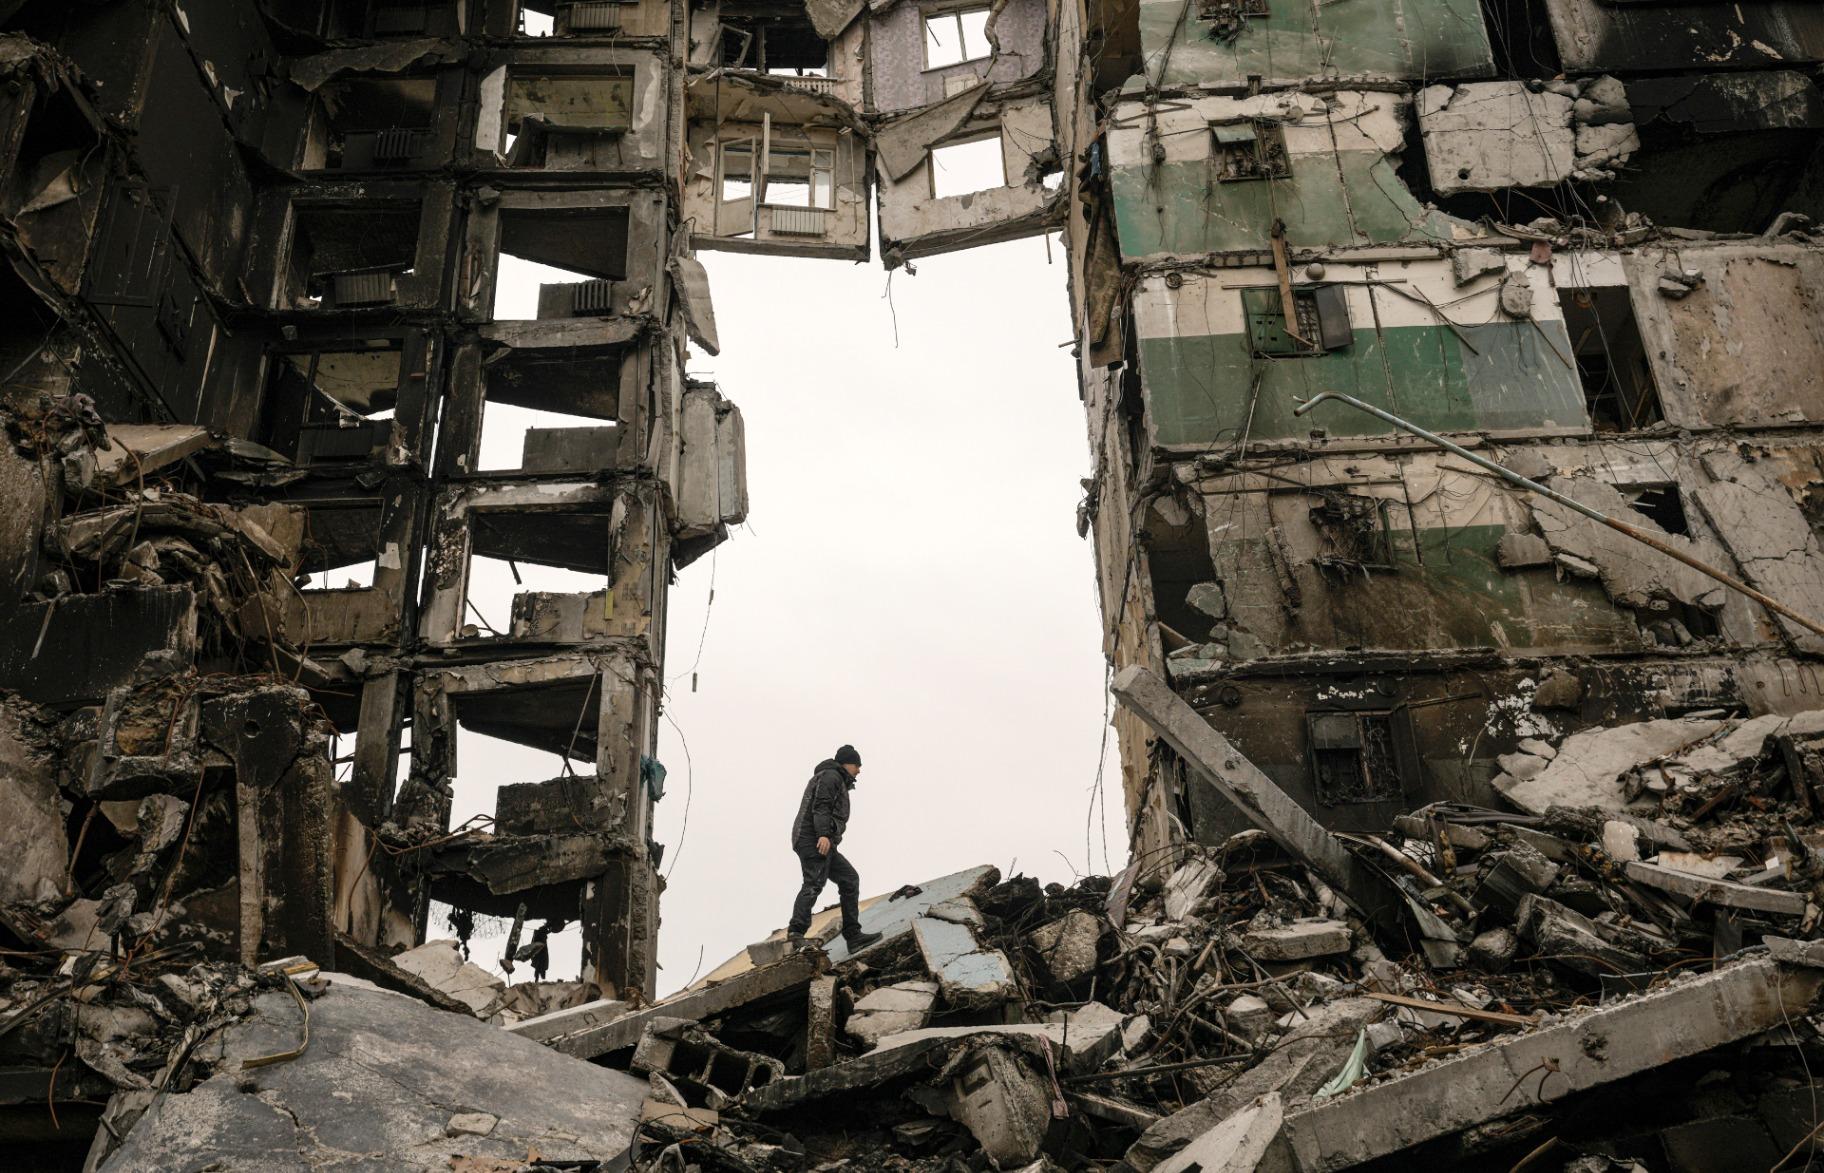 A resident looks for belongings in an apartment building destroyed during fighting between Ukrainian and Russian forces in Borodyanka, Ukraine, April 5, 2022. (AP Photo / Vadim Ghirda, File)